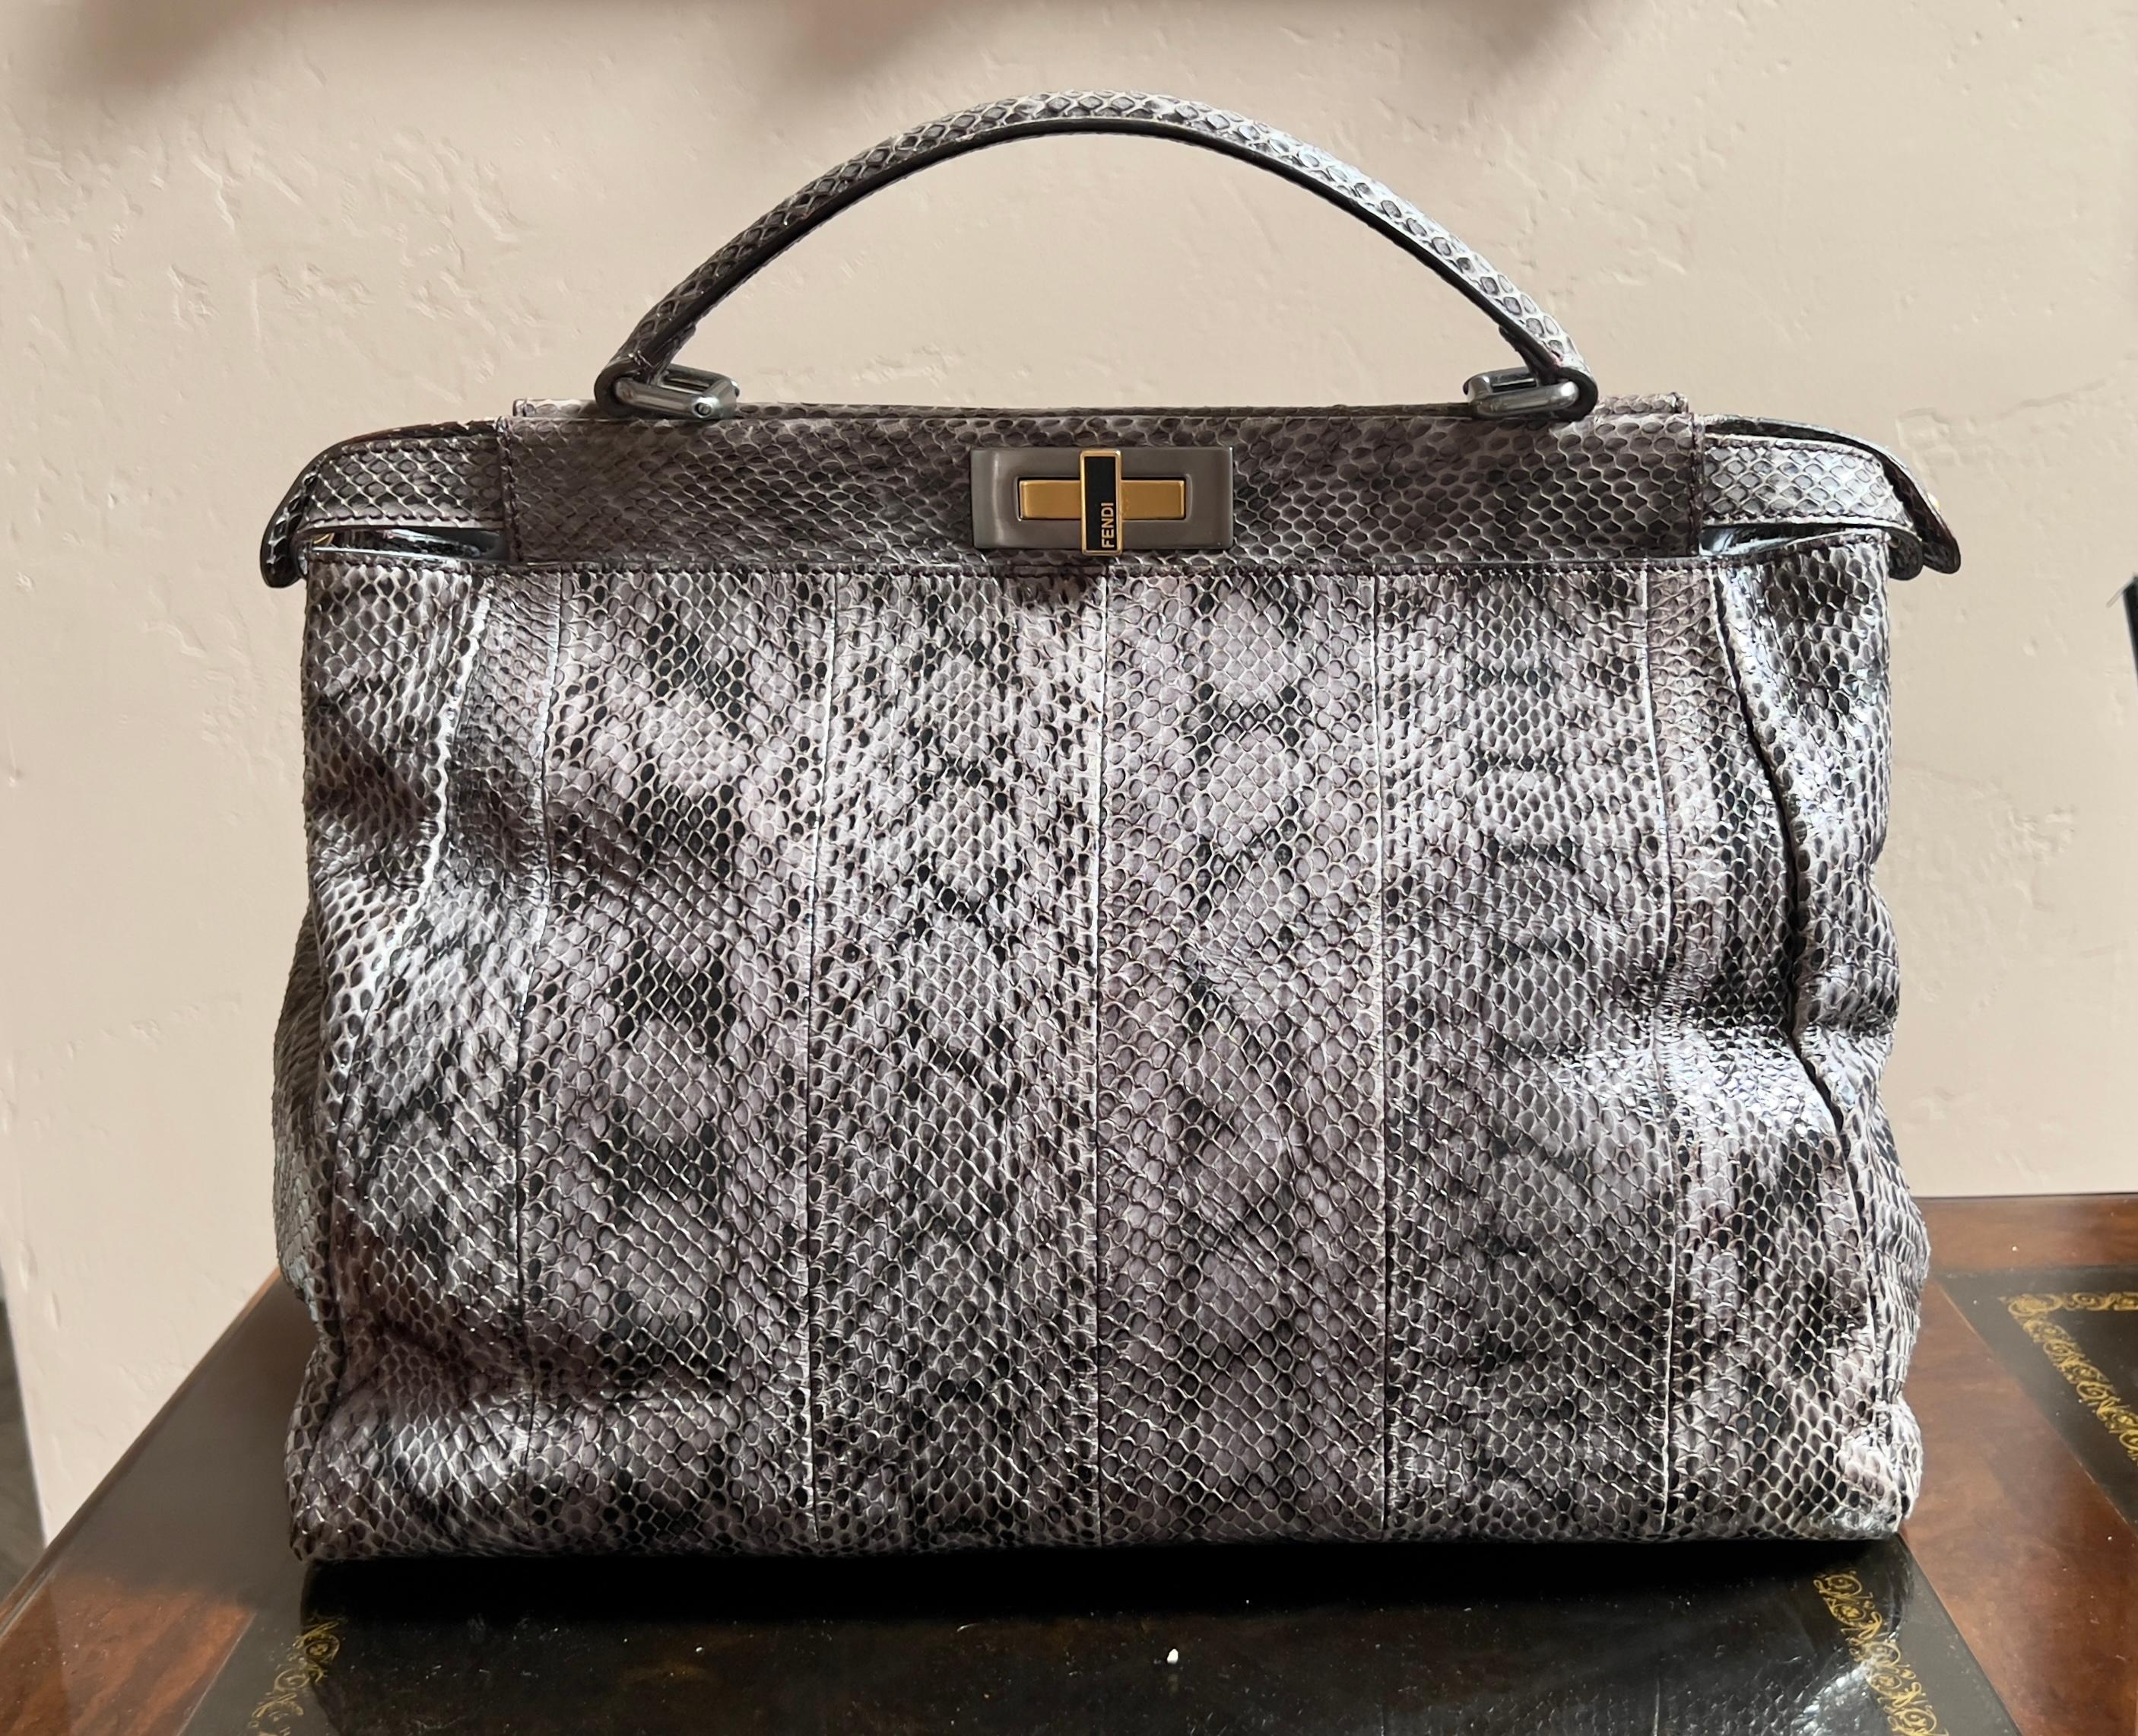 This beautiful Fendi skin peekaboo handbag tote is crafted of grey leather skin with silver, gold and black enamel accents. Black enameled turnlock hardware on both sides. Signature two large peekaboo compartments. Inner zipper compartment in one of